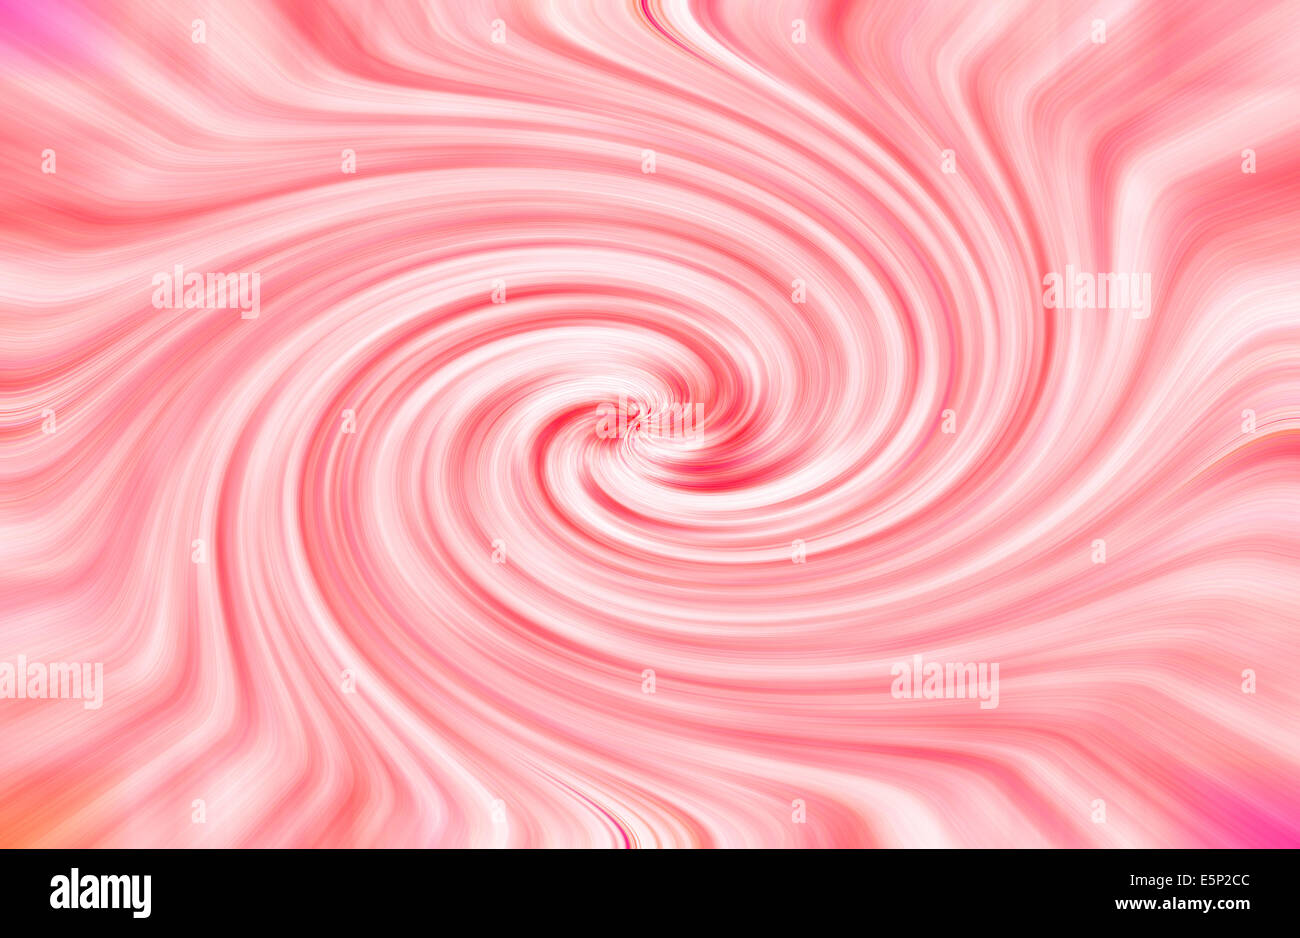 Abstract art fond rose Banque D'Images